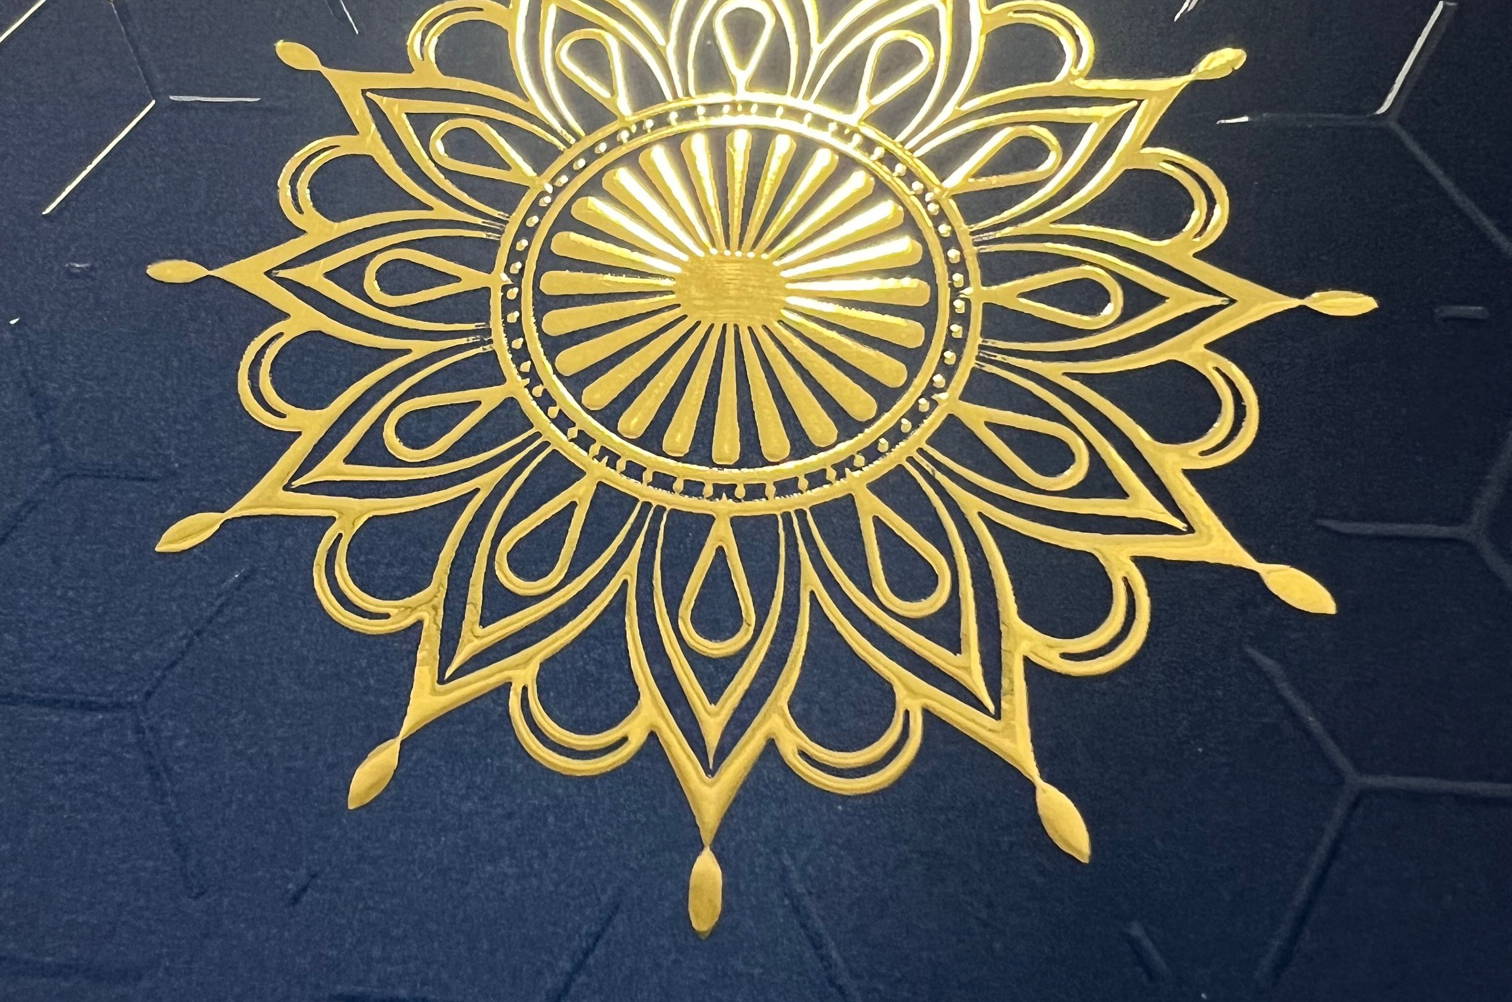 Raised gold and clear printing on a navy blue paper.